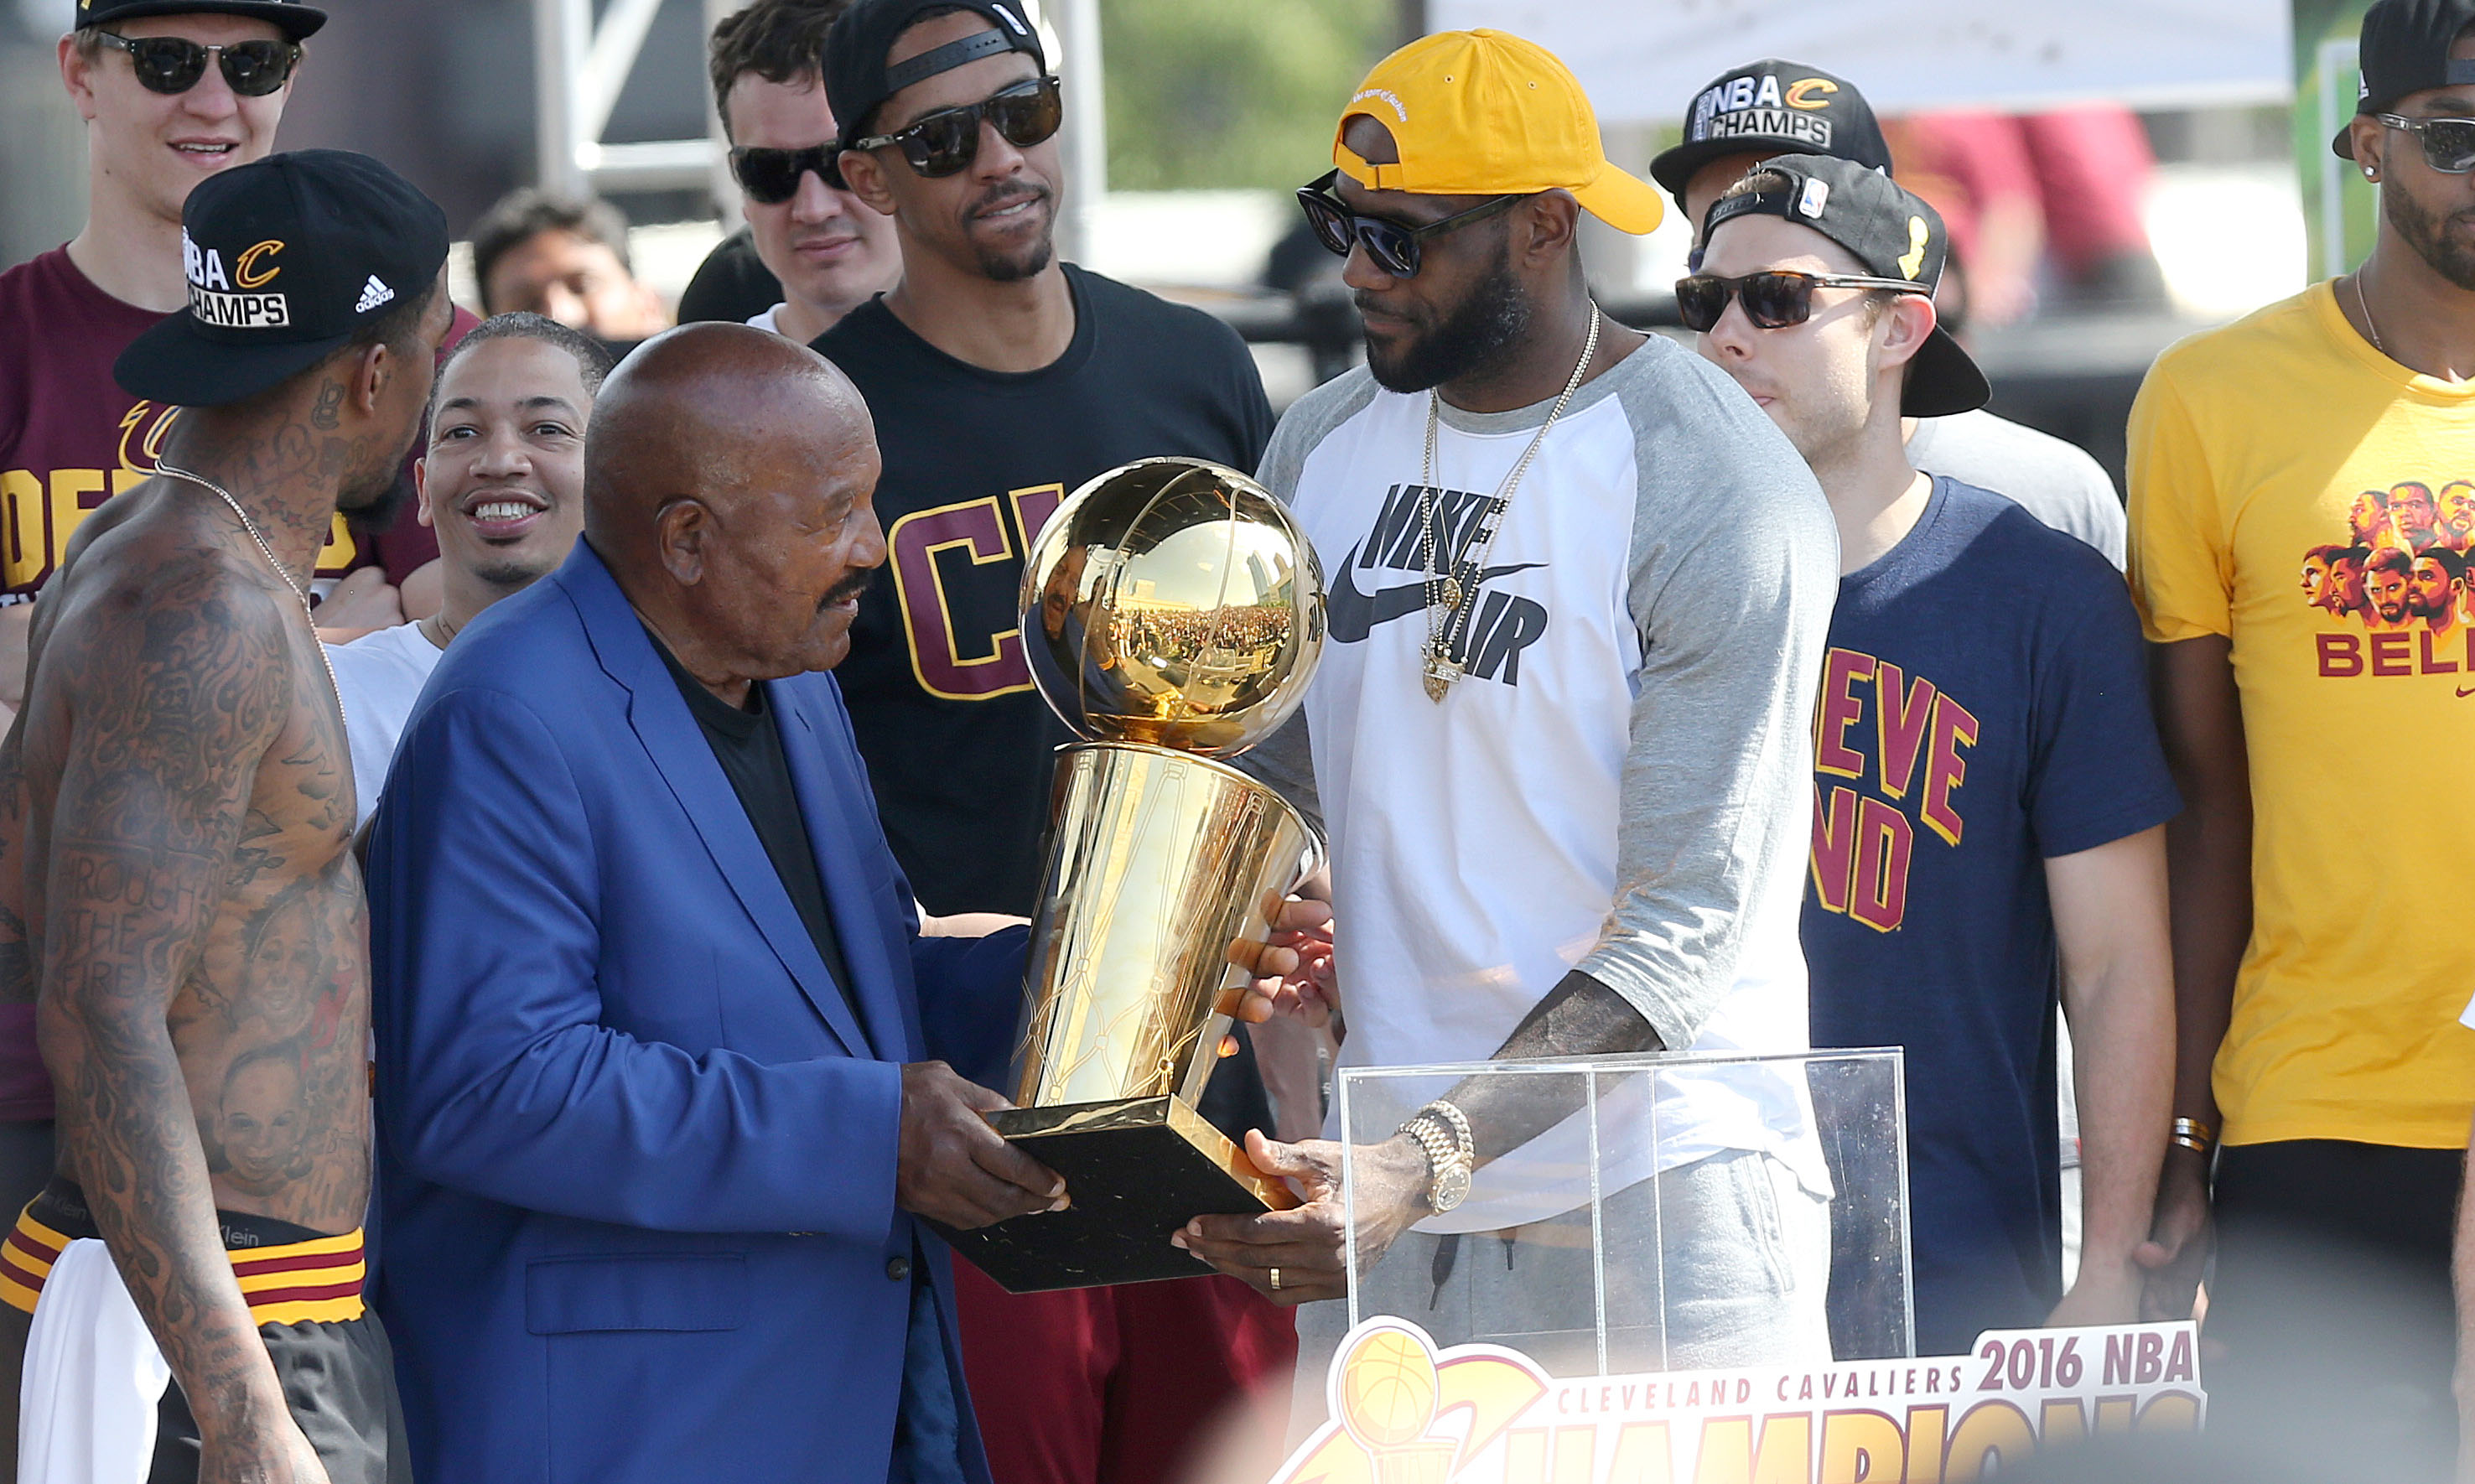 Cleveland Browns great Jim Brown hands the Larry O'Brien trophy to Cleveland Cavaliers forward LeBron James at a rally to celebrate and honor the 2016 NBA Champion Cleveland Cavaliers.    Joshua Gunter, cleveland.com June 22, 2016. Cleveland.